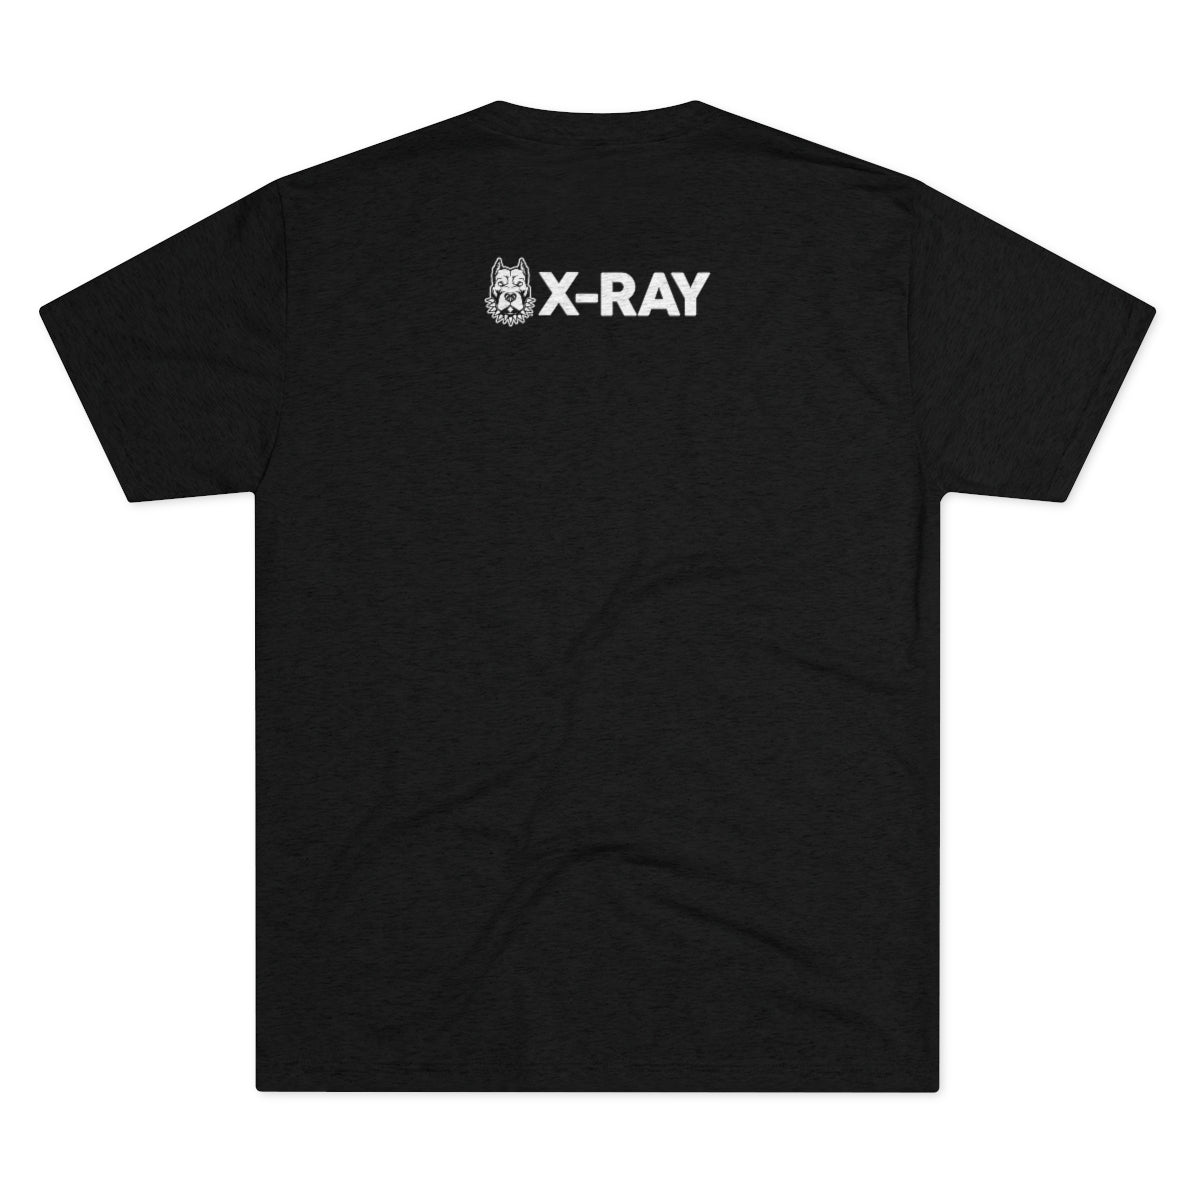 Special Collection – X-Ray: Looser – Unisex Tri-Blend Crew Tee